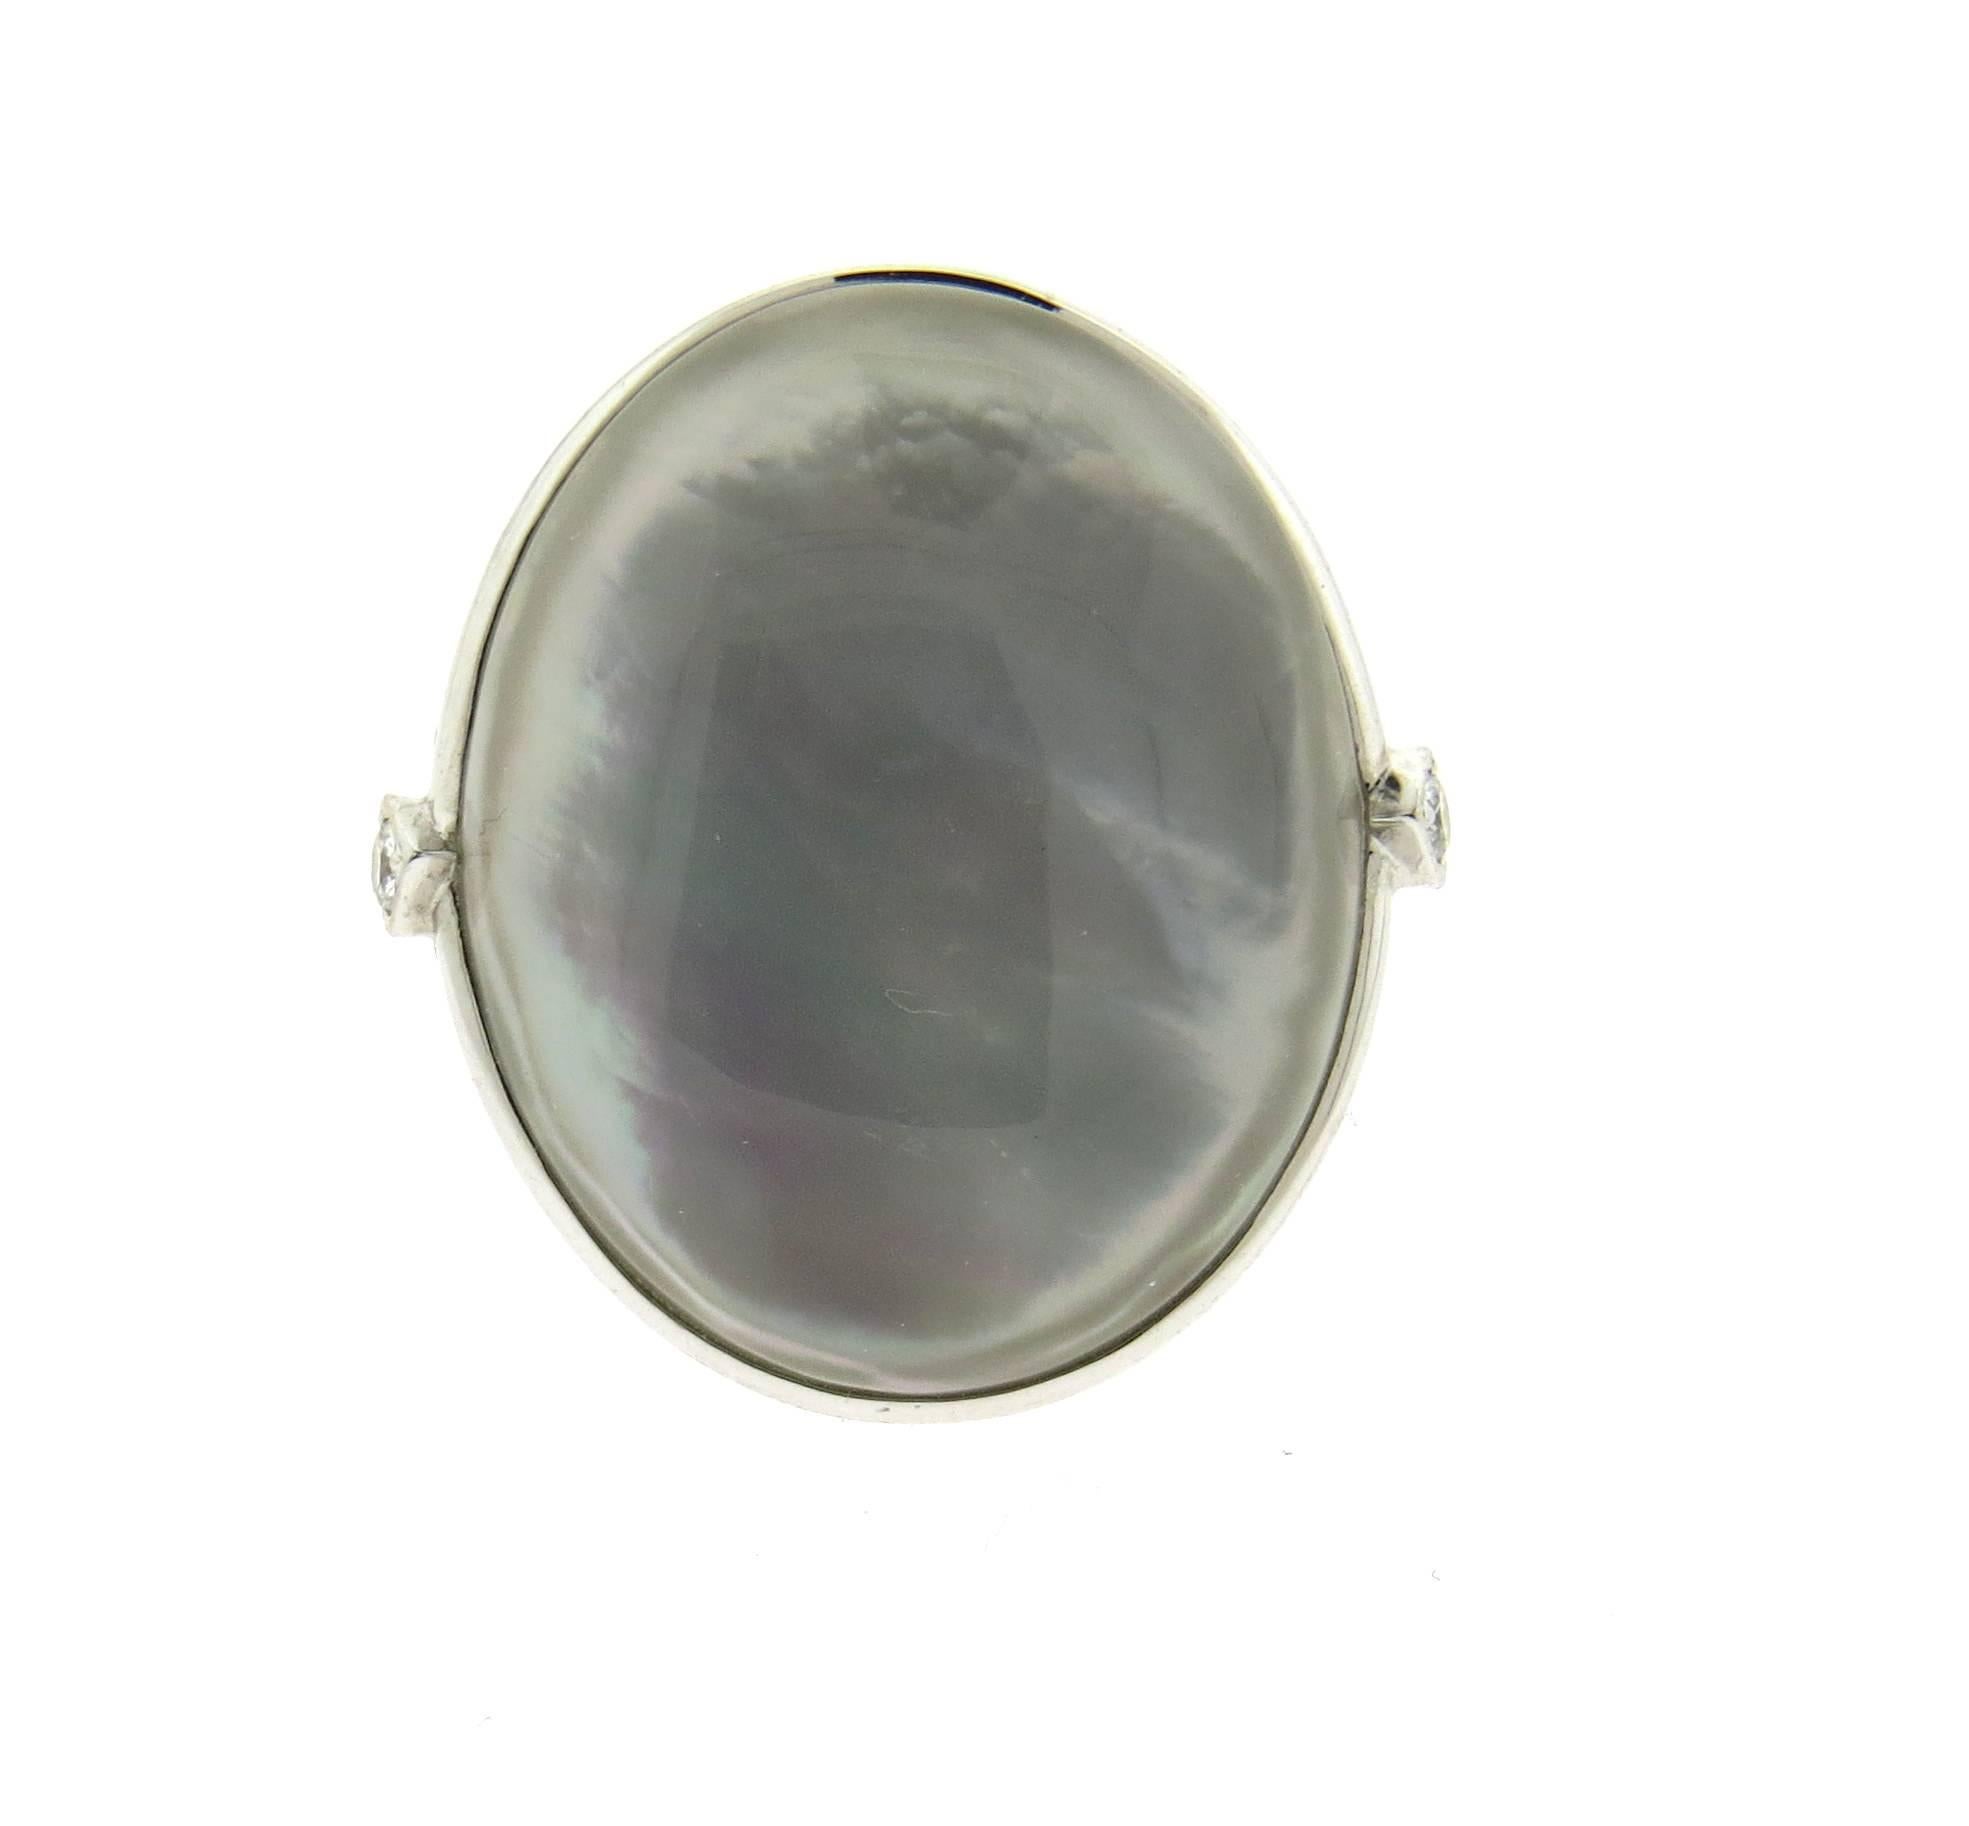 New large 18k white gold ring, crafted by Ivanka Trump, featuring oval mother of pearl top, surrounded with approx. 0.51ctw in diamonds. Ring size 7 1/4, ring top is 29mm x 27mm. Marked: Ivanka Trump 750, N7108. Weight of the piece - 18.2